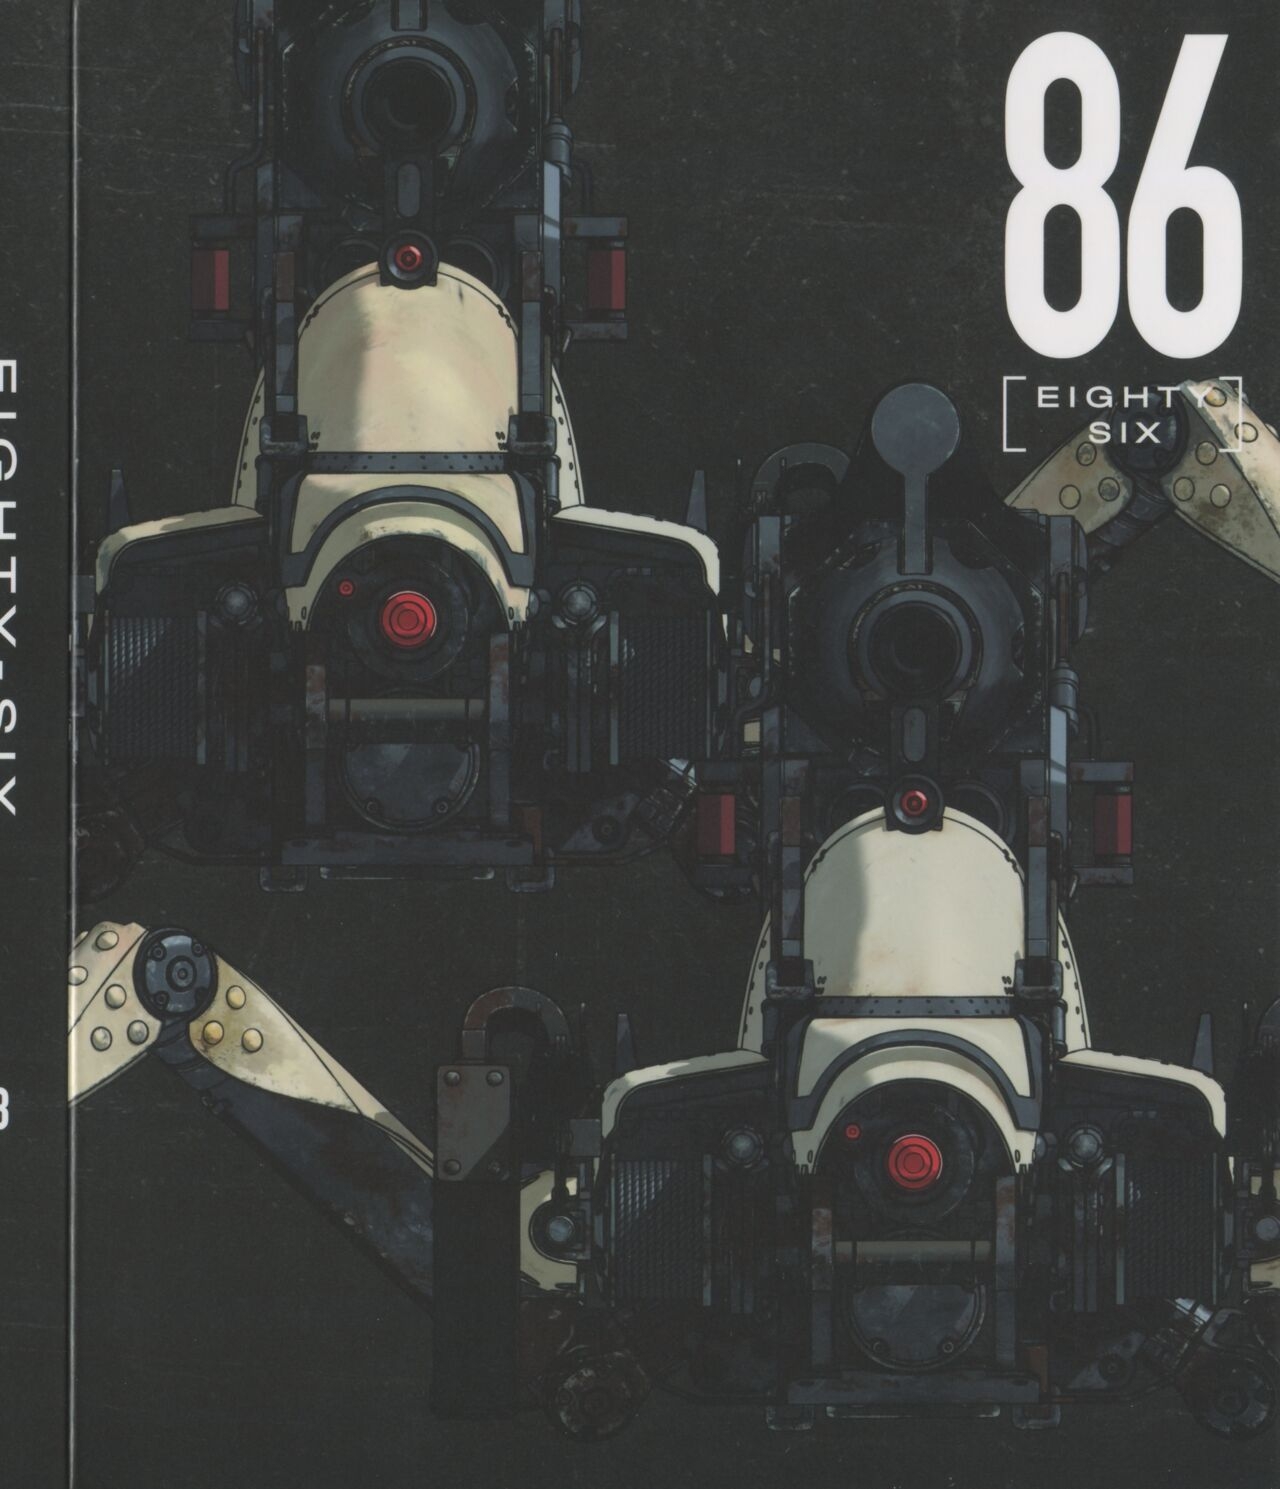 86 Eighty Six BD Scans + Booklet 84